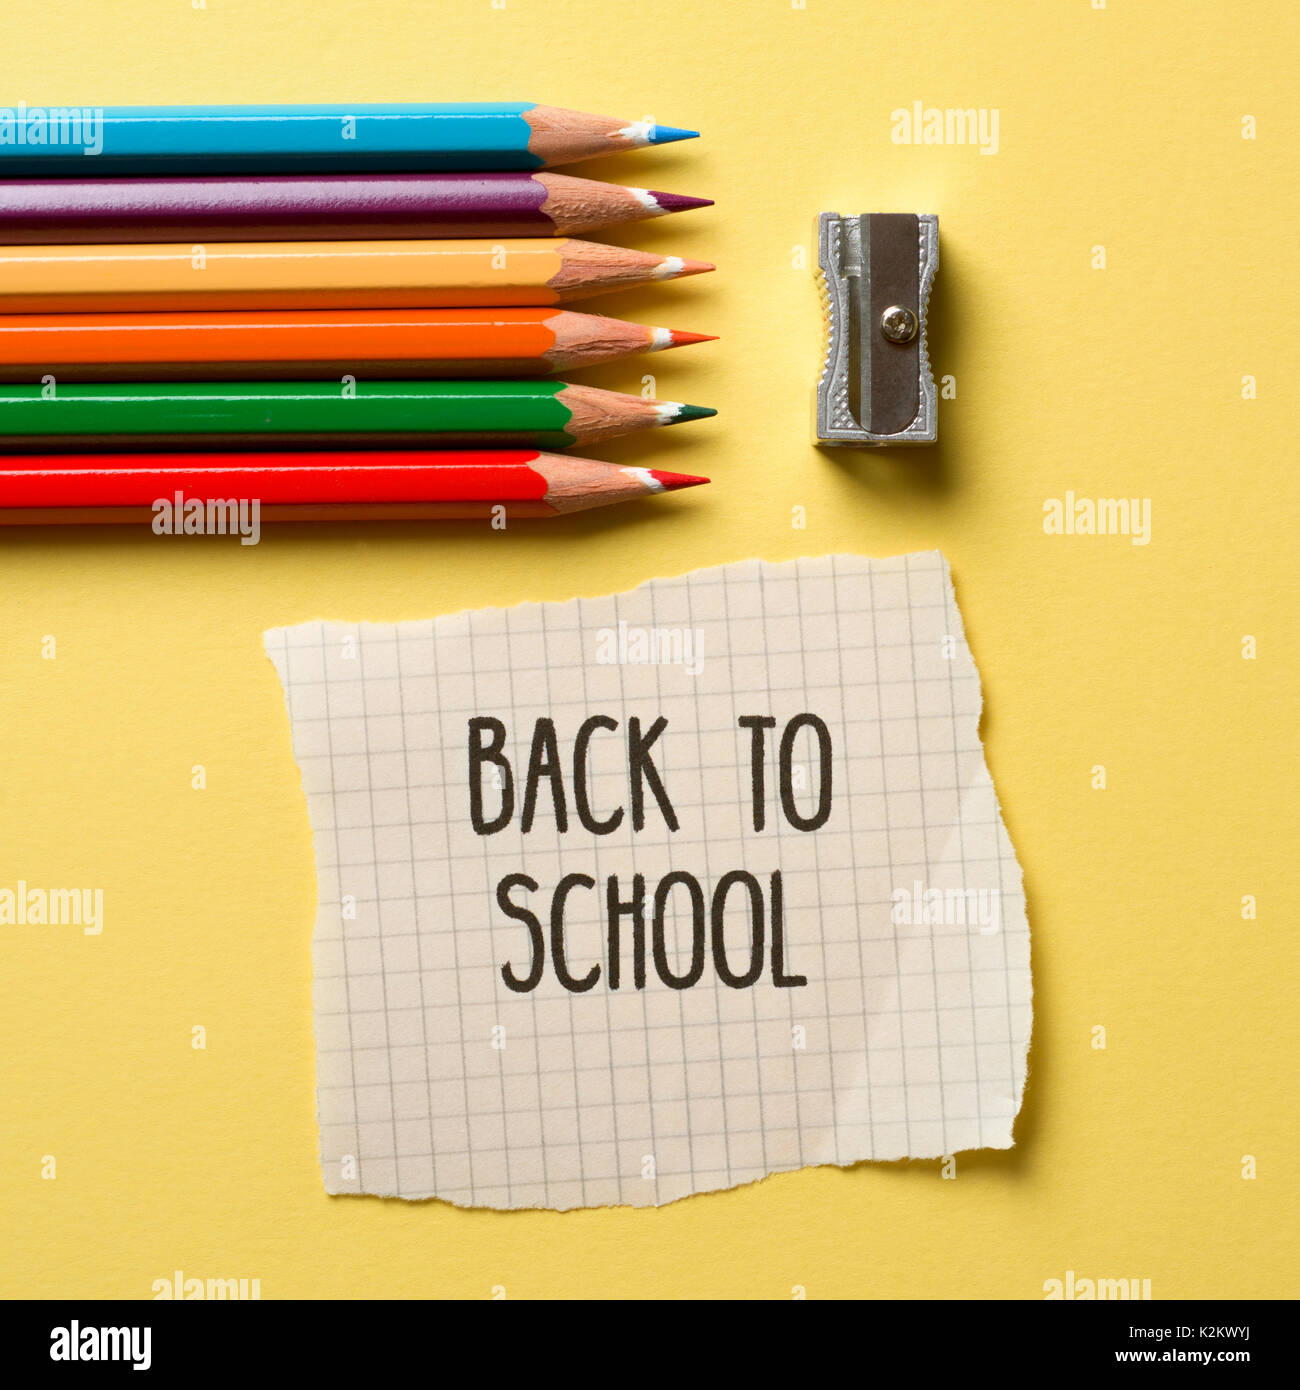 high-angle shot of some pencil crayon of different colors, a metallic sharpener and a note with the text back to school on a yellow background Stock Photo